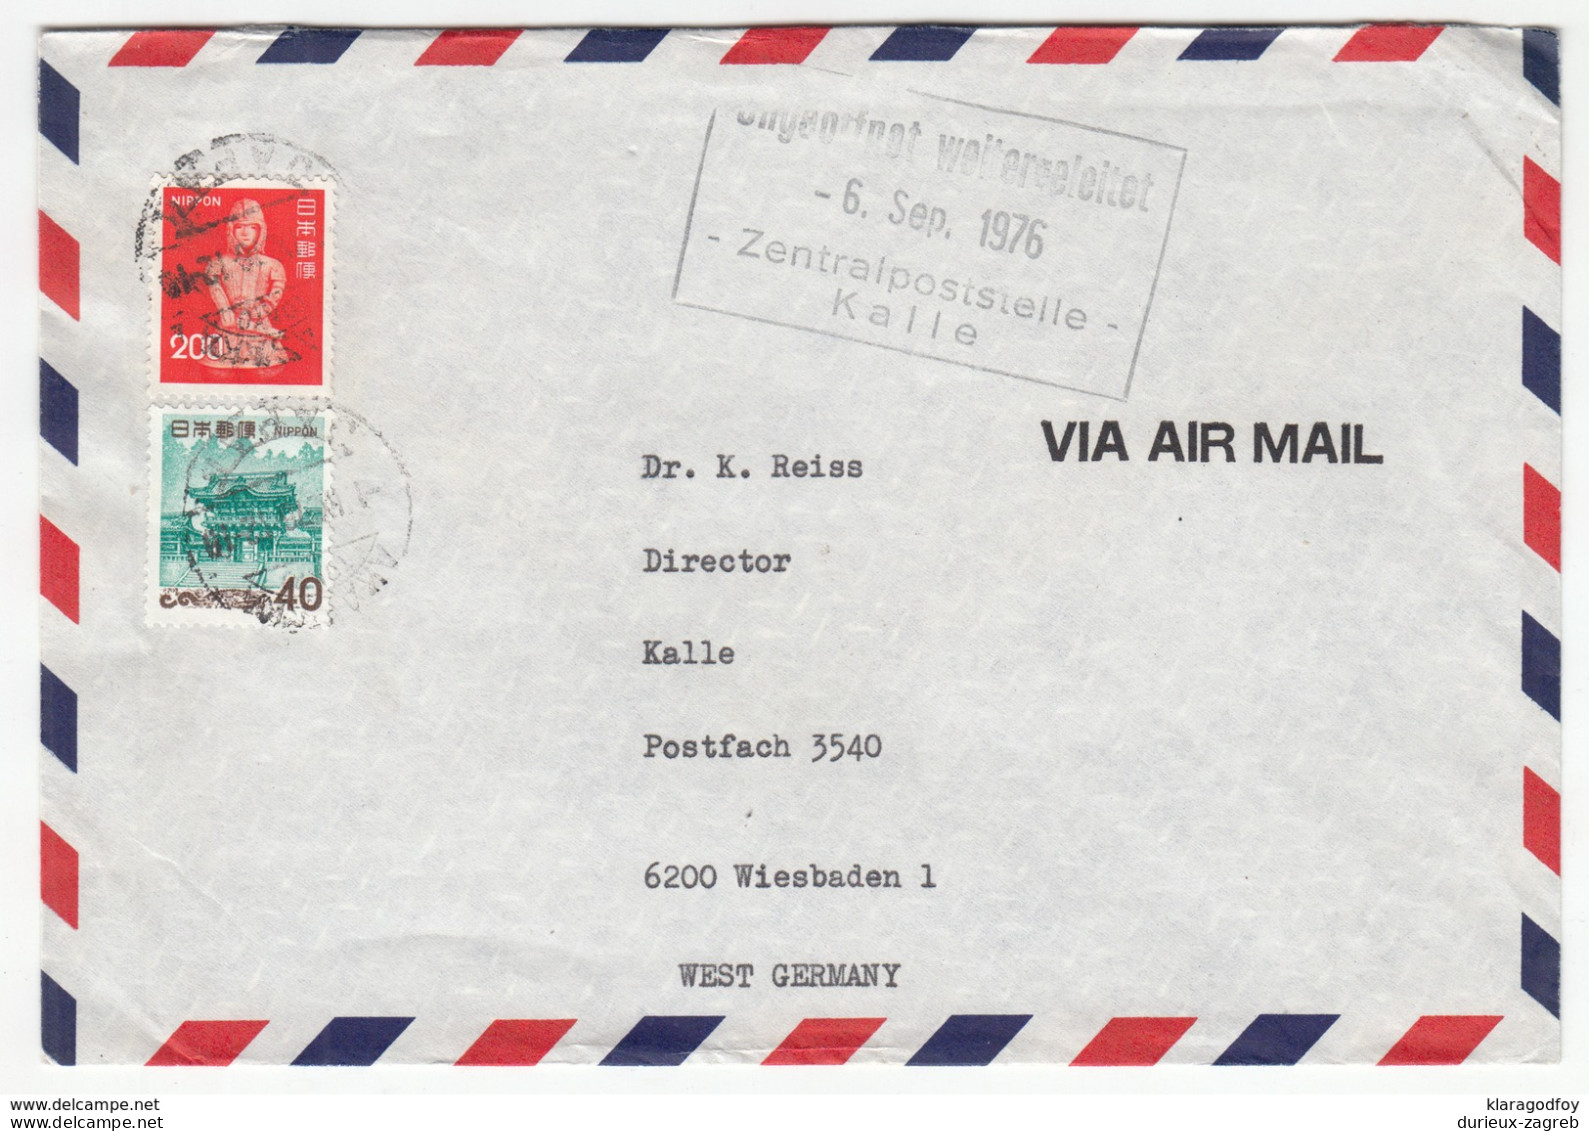 Japan, Hoechst Japan Company Airmail Letter Cover Travelled 1976 Akasama Pmk B171025 - Lettres & Documents